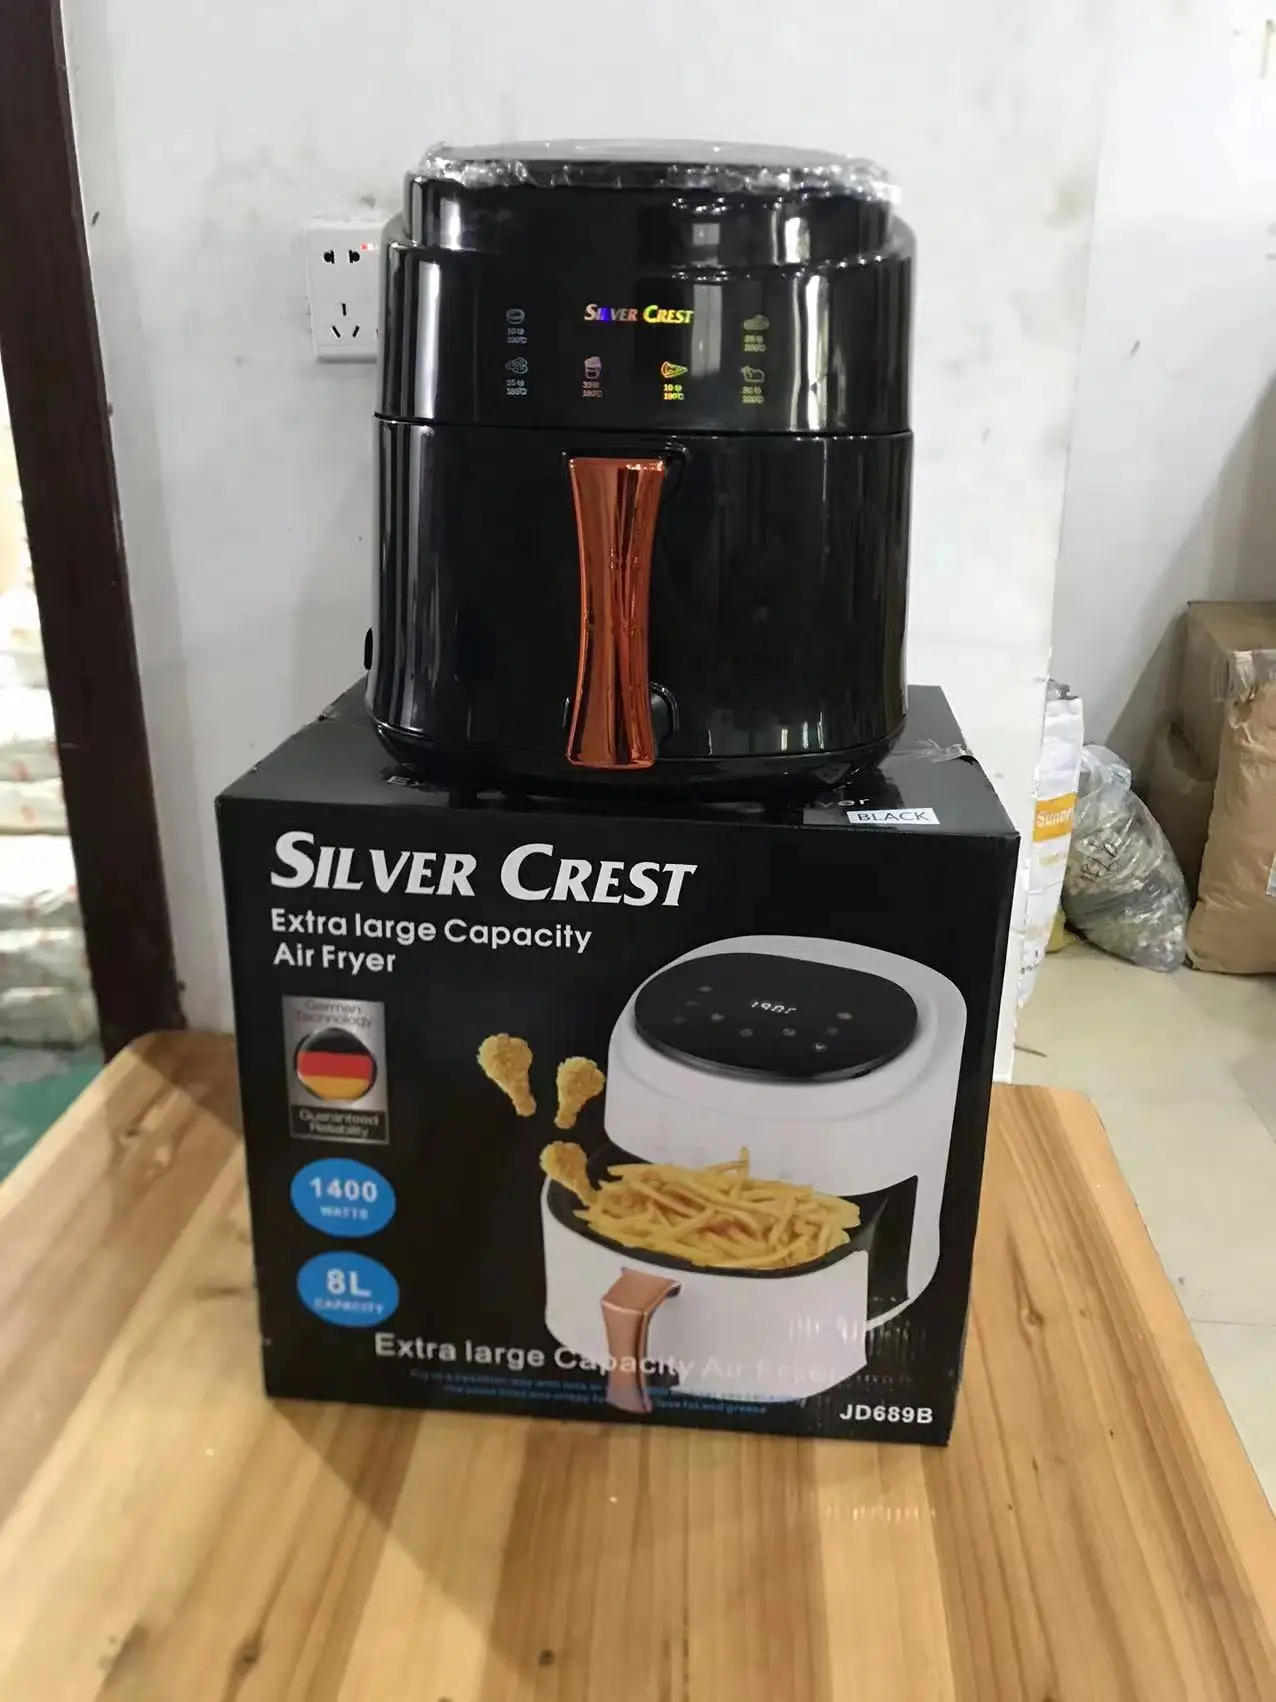 https://ae01.alicdn.com/kf/Sc3f9859105734ae2969e1ebc92b91427c/8L-intelligent-air-fryer-household-multi-function-automatic-large-capacity-electric-fryer-wholesale-will-sell-gifts.jpg